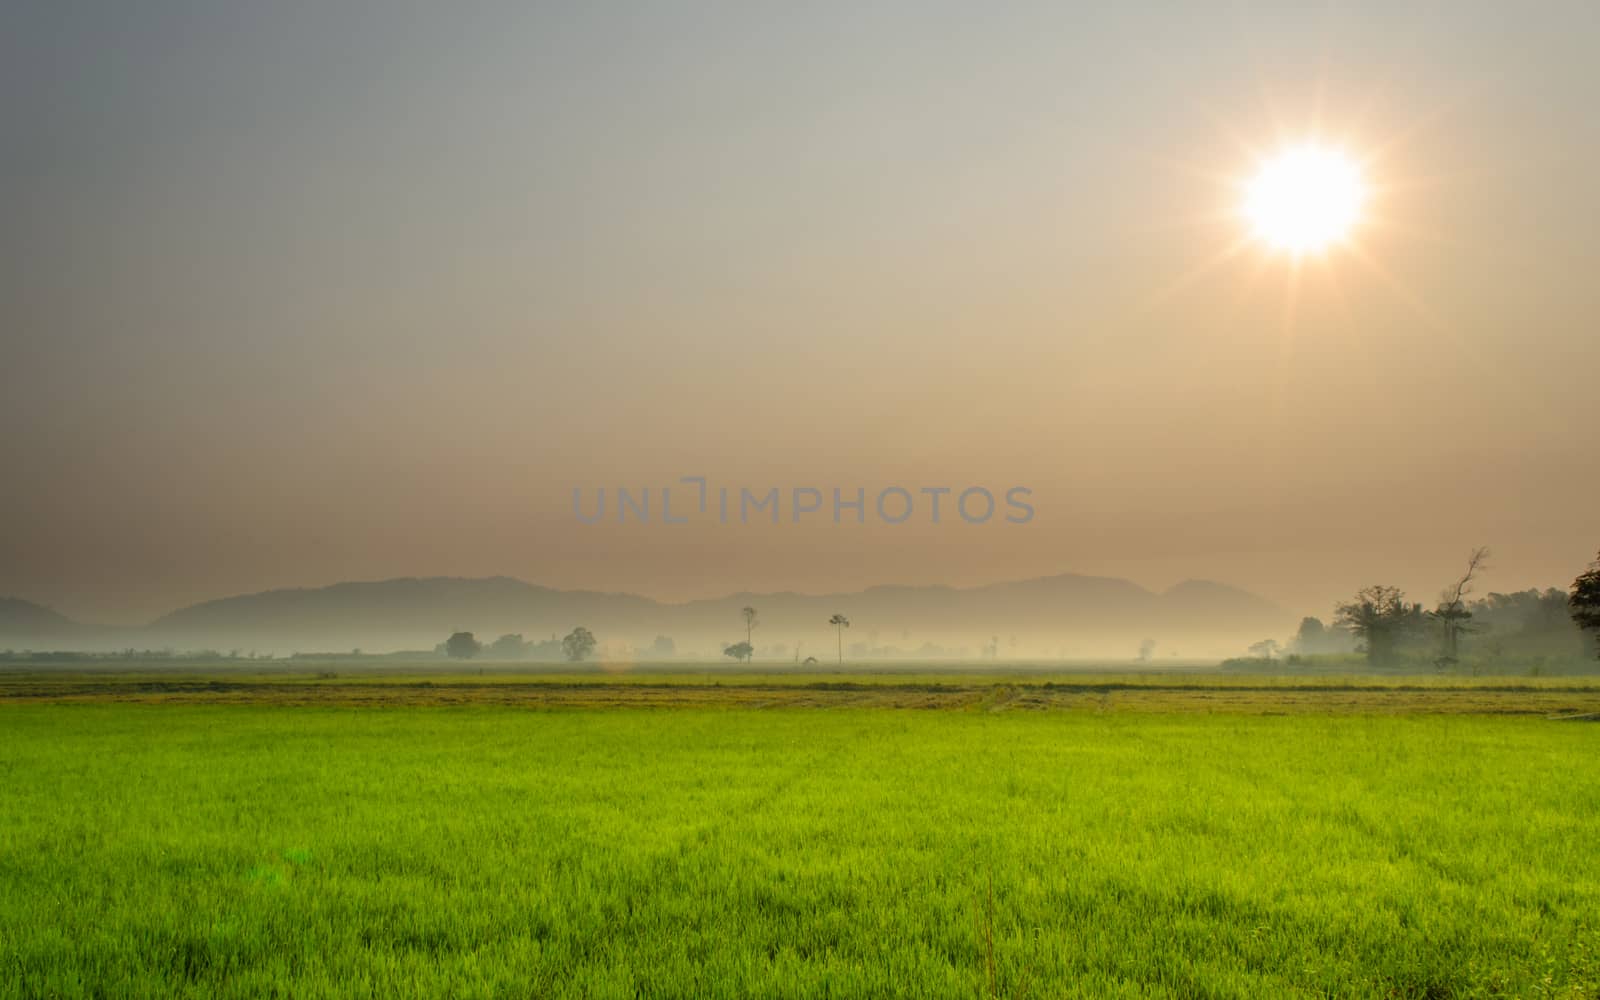 The Landscape of Rice Field and Sunrise Dawn.